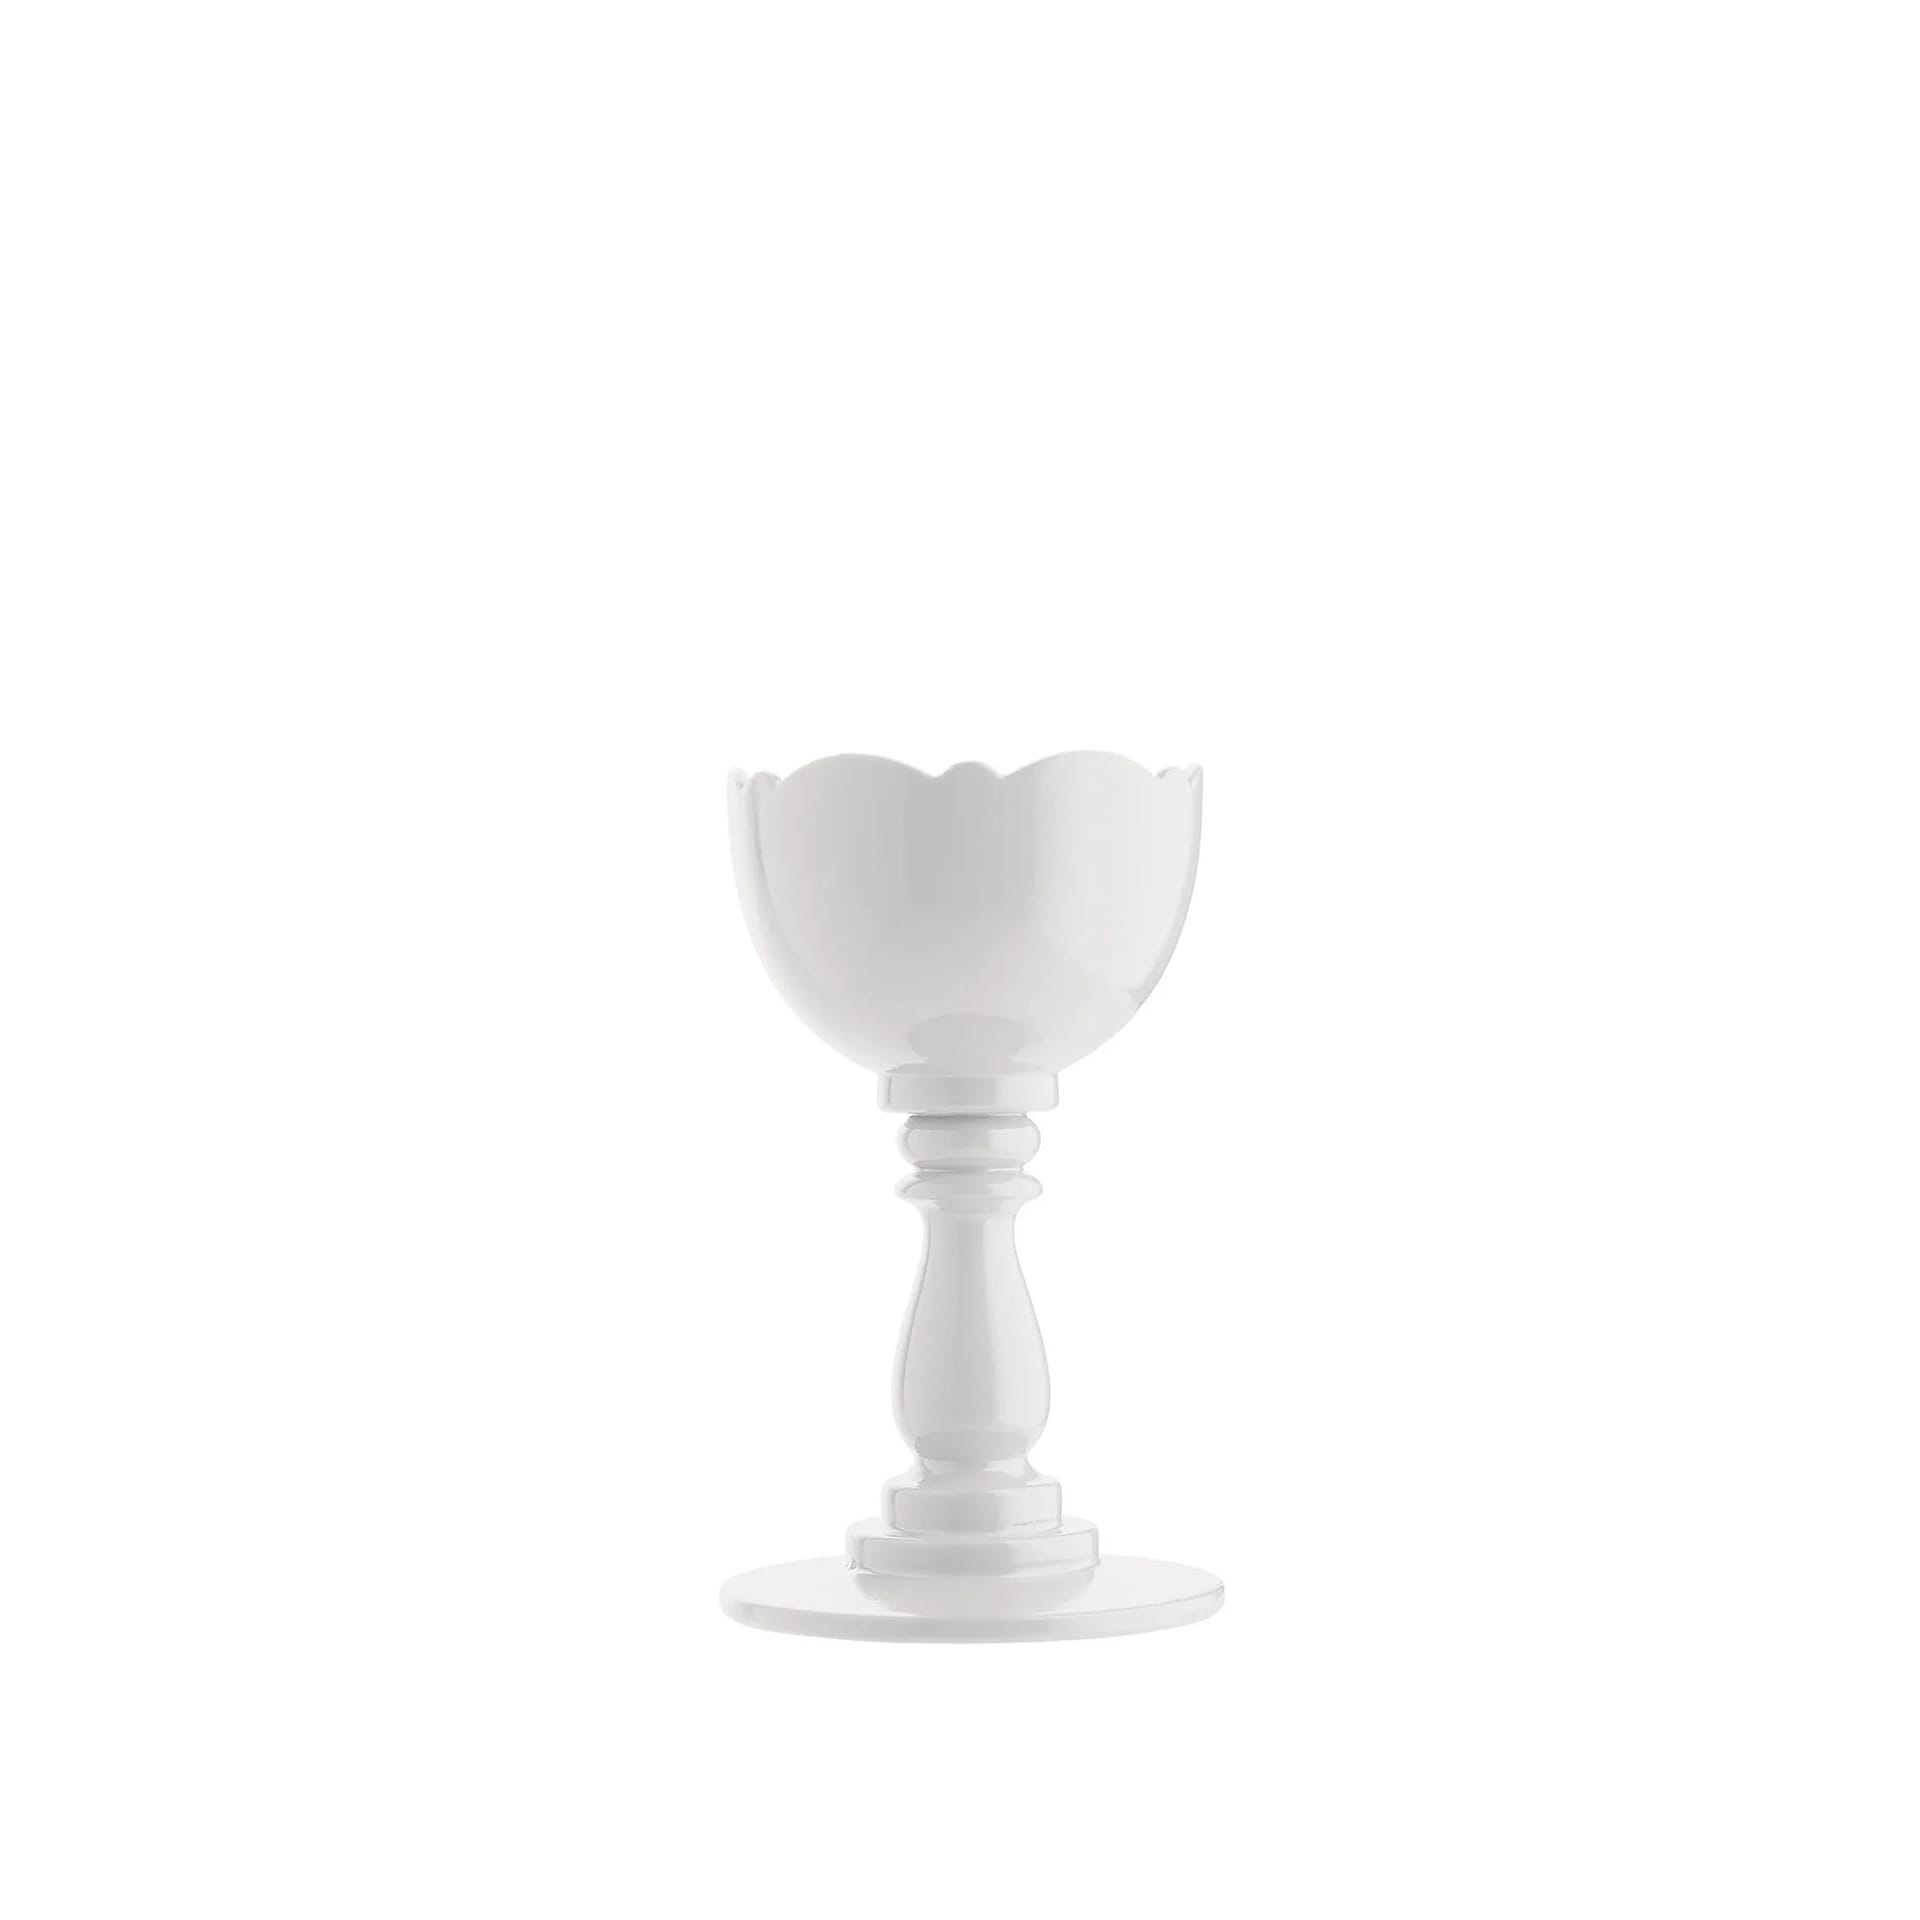 Dressed Egg cup with spoon - Alessi - Marcel Wanders - NO GA